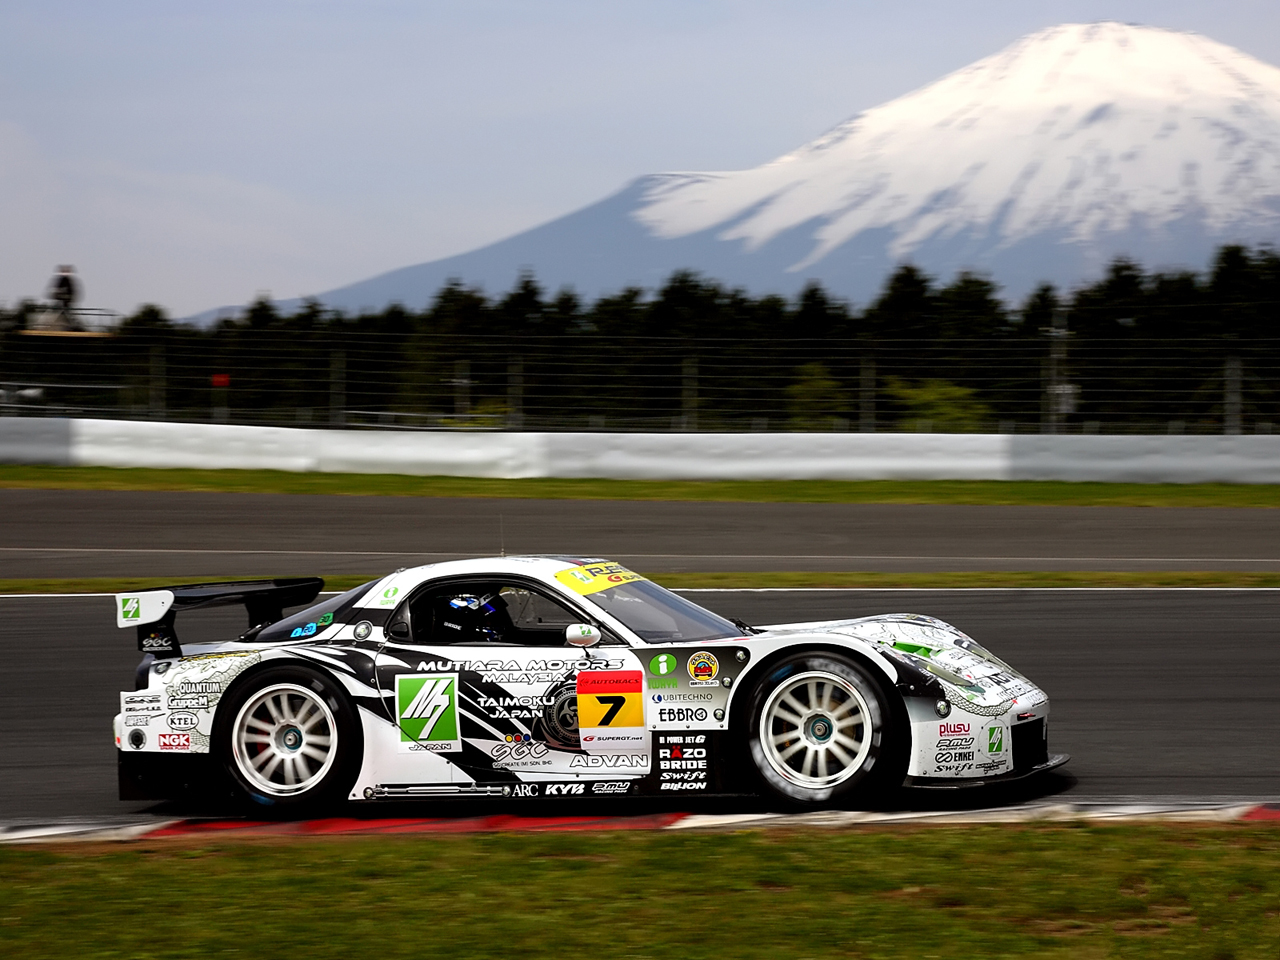 78 Super GT Racing HD Wallpapers Backgrounds - Wallpaper Abyss